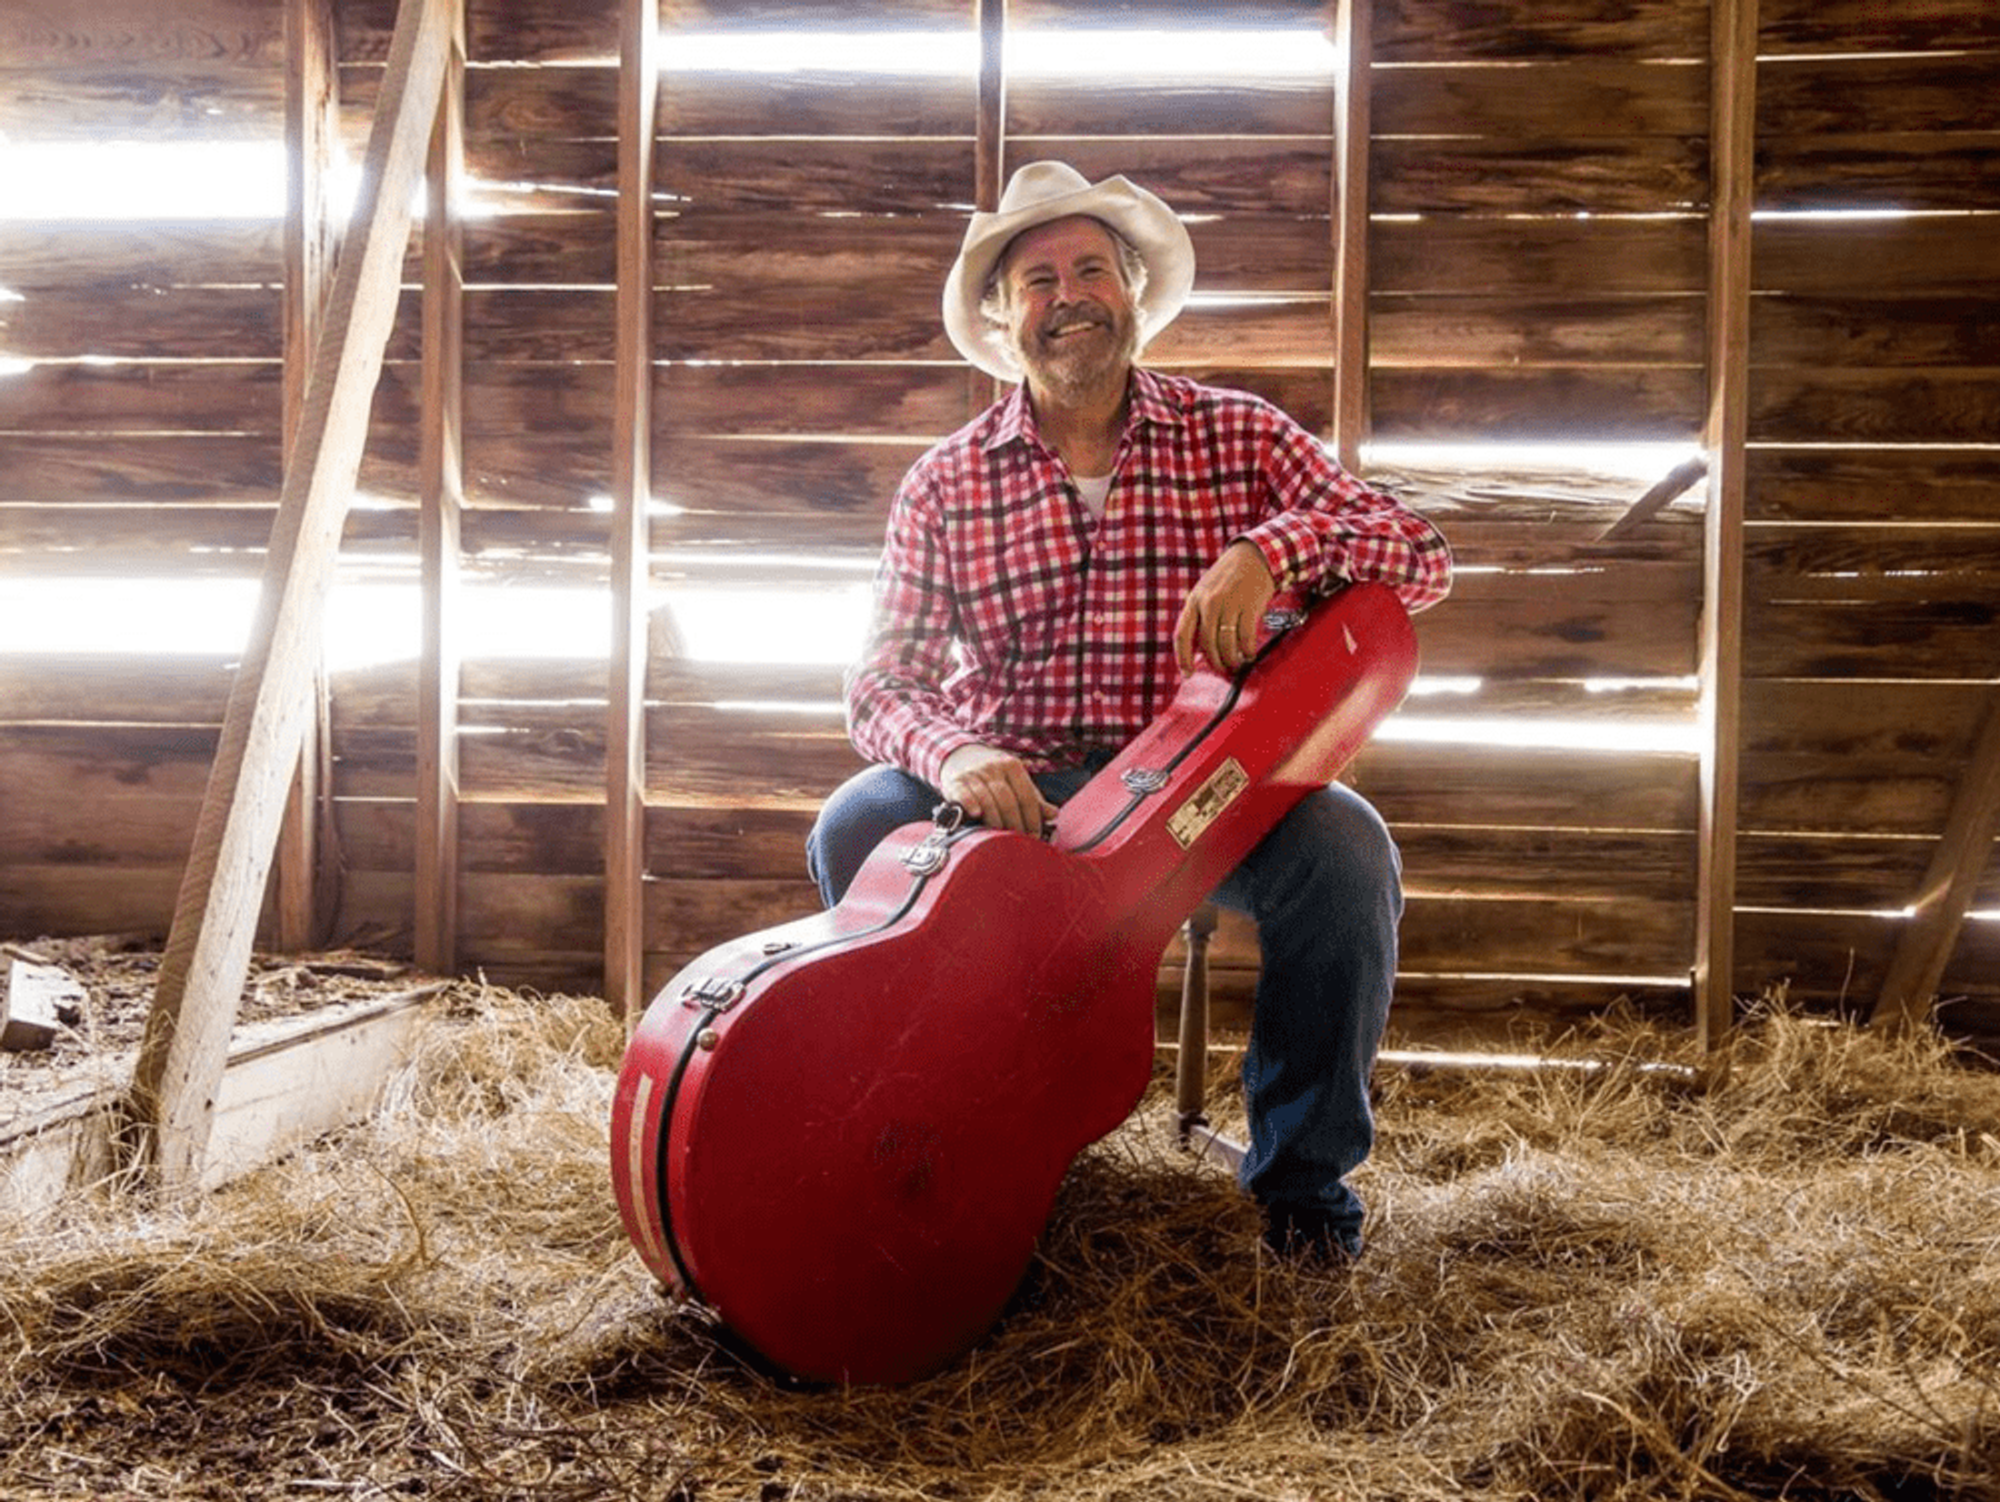 Robert Earl Keen plays at the Levitt Pavilion for the Performing Arts on July 23.